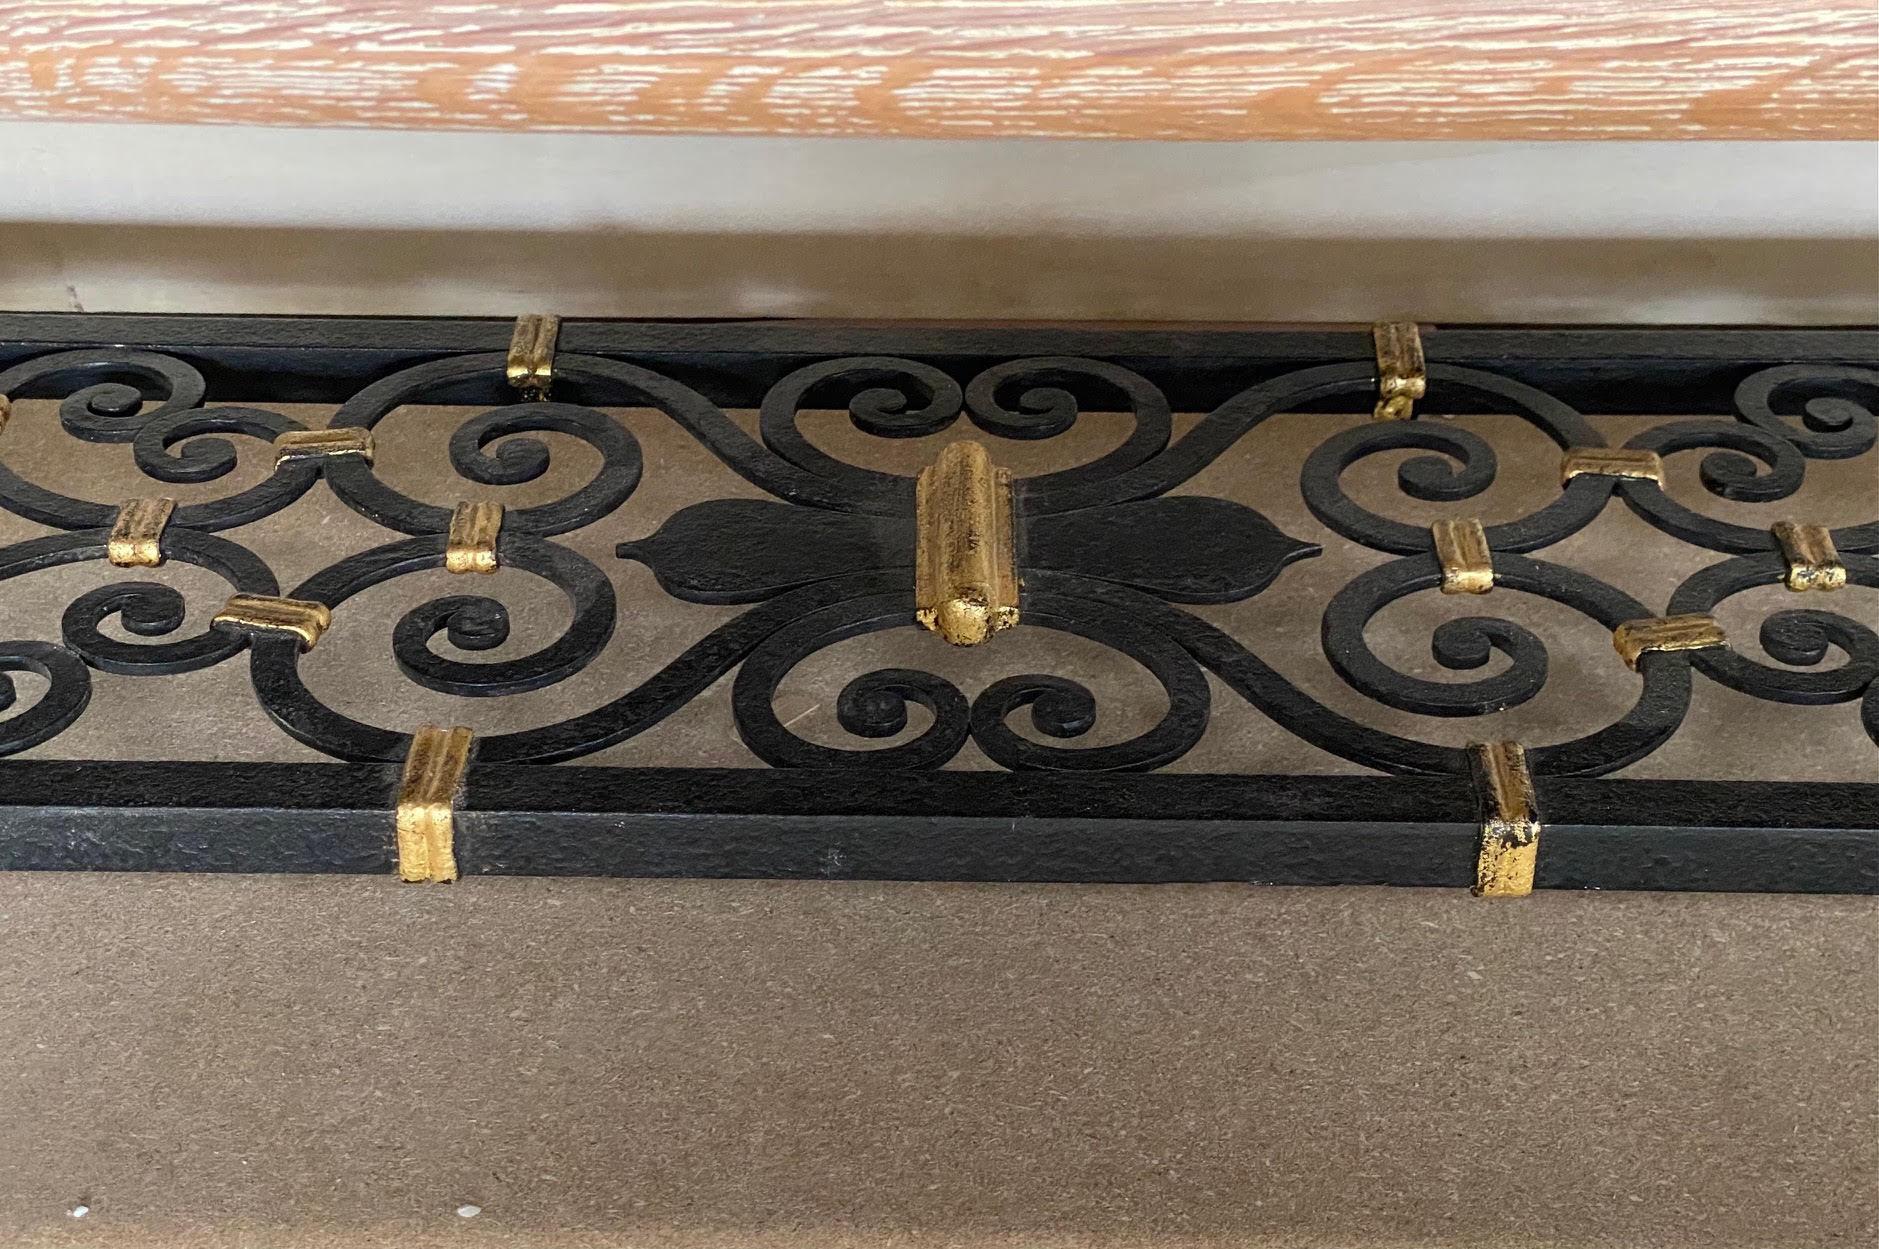 Impressive credenza made of cerused oak sculpted on the sides and base.
The bottom features a wrought iron shelf with a brass connection and the door fronts are covered with leather decorated with iron and brass cabochons. 
A very sophisticated